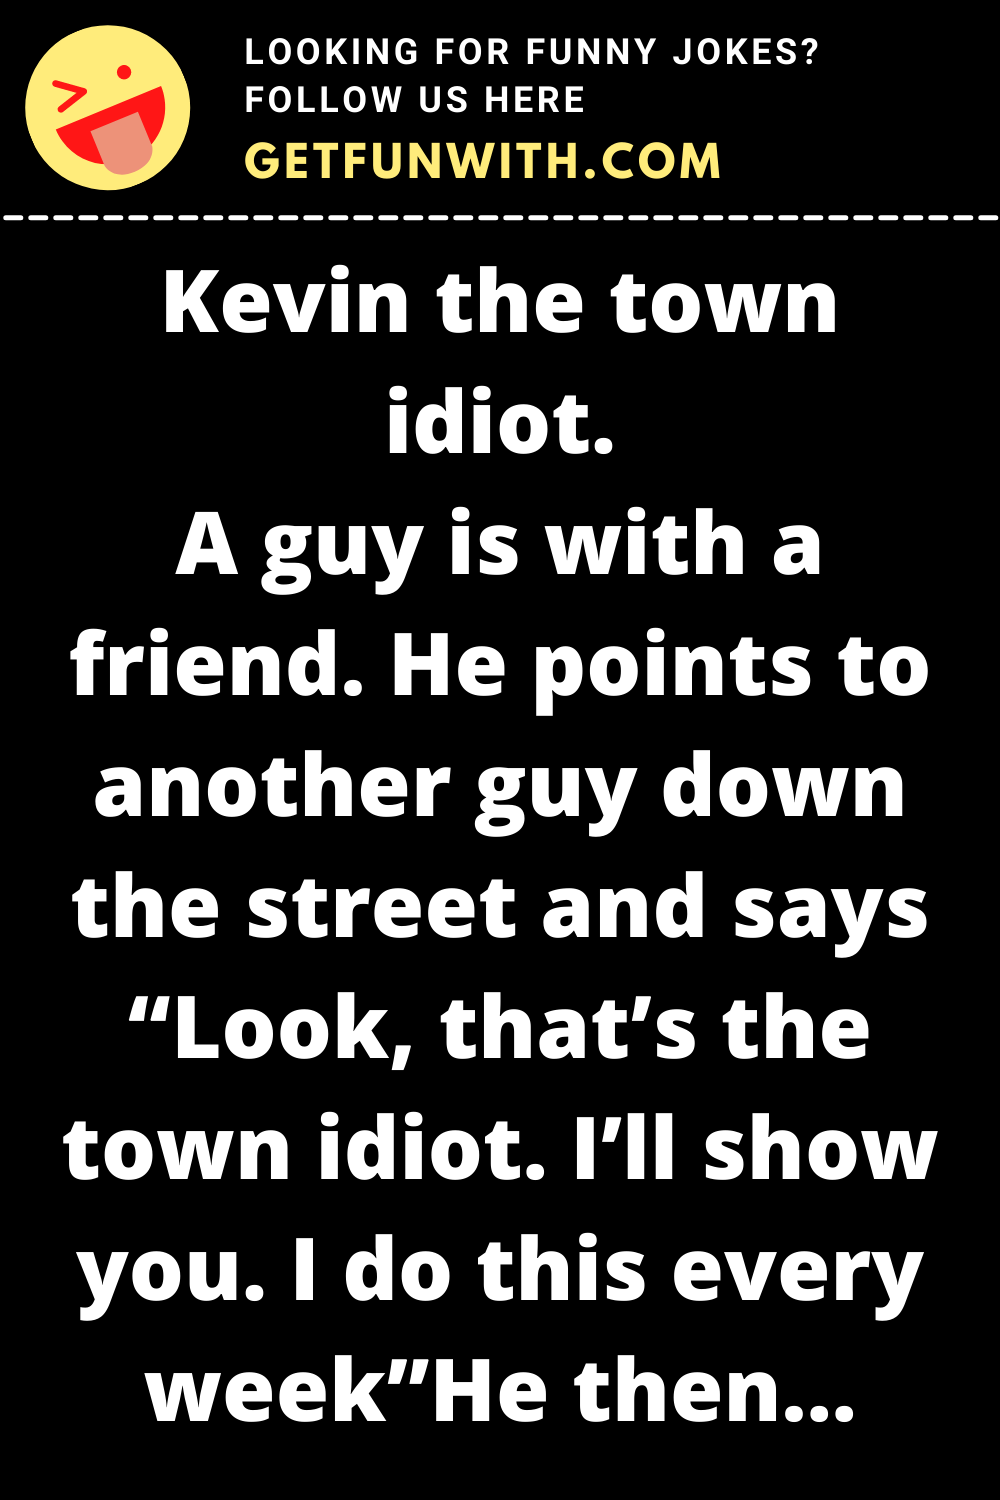 Kevin the town idiot.